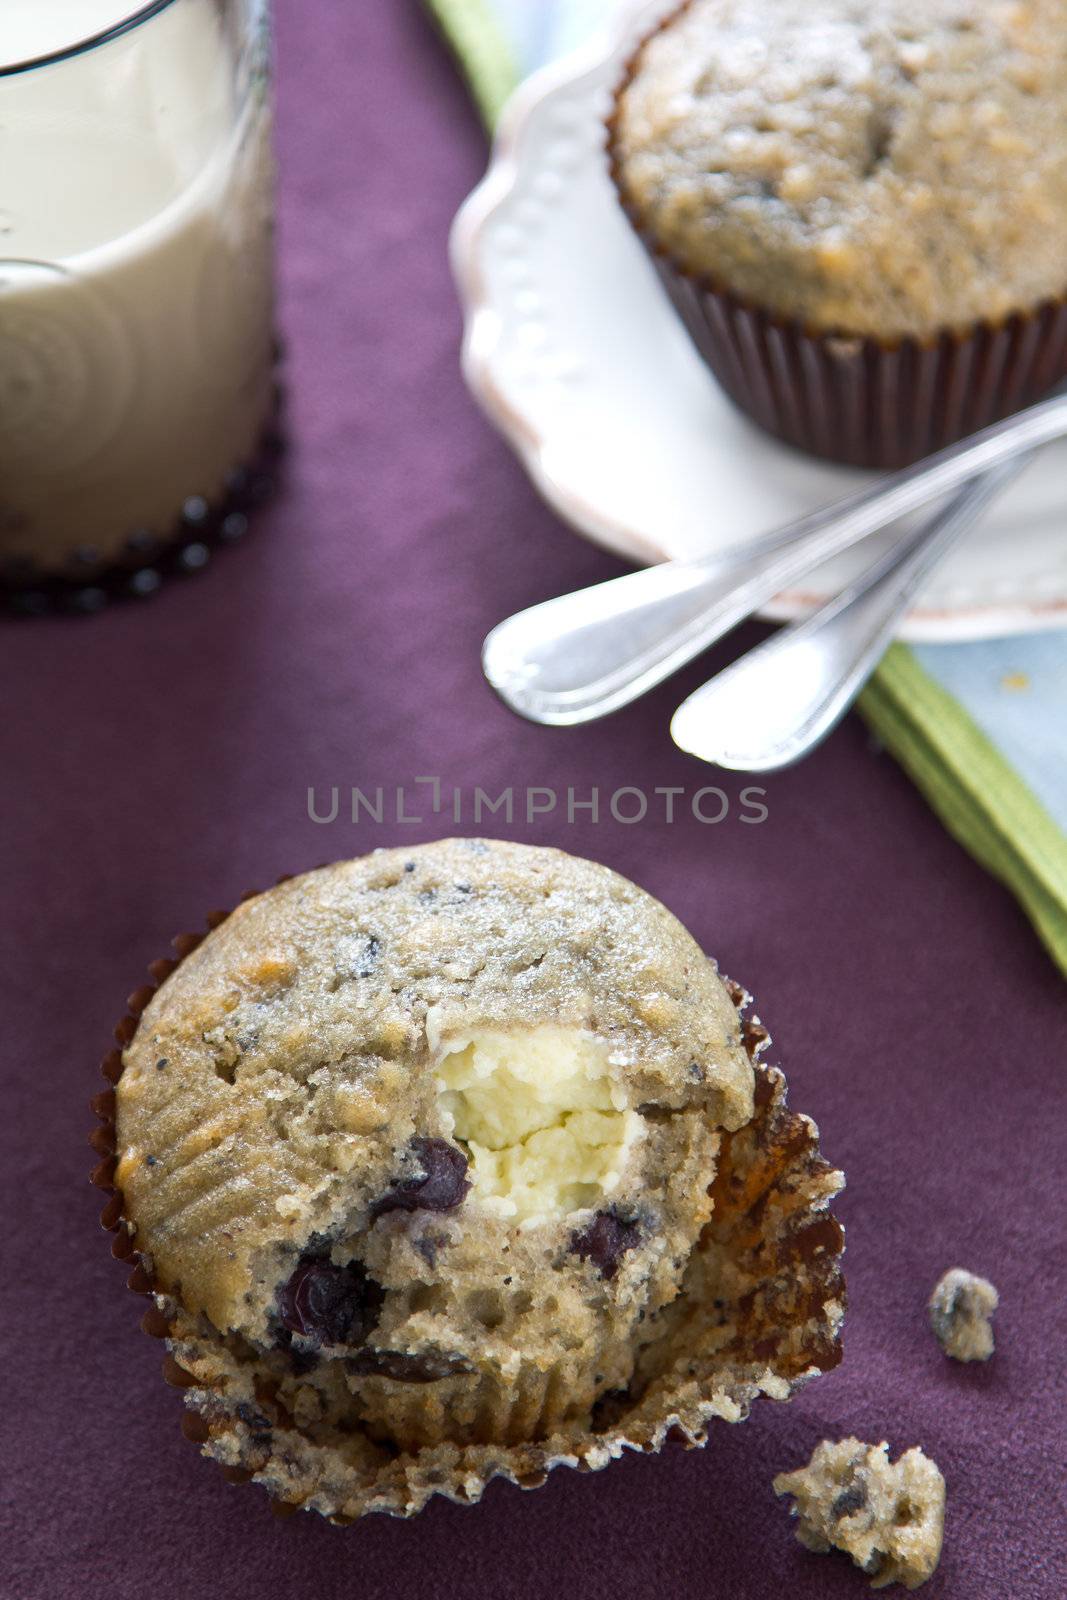 Blueberry with cream cheese muffin by vanillaechoes